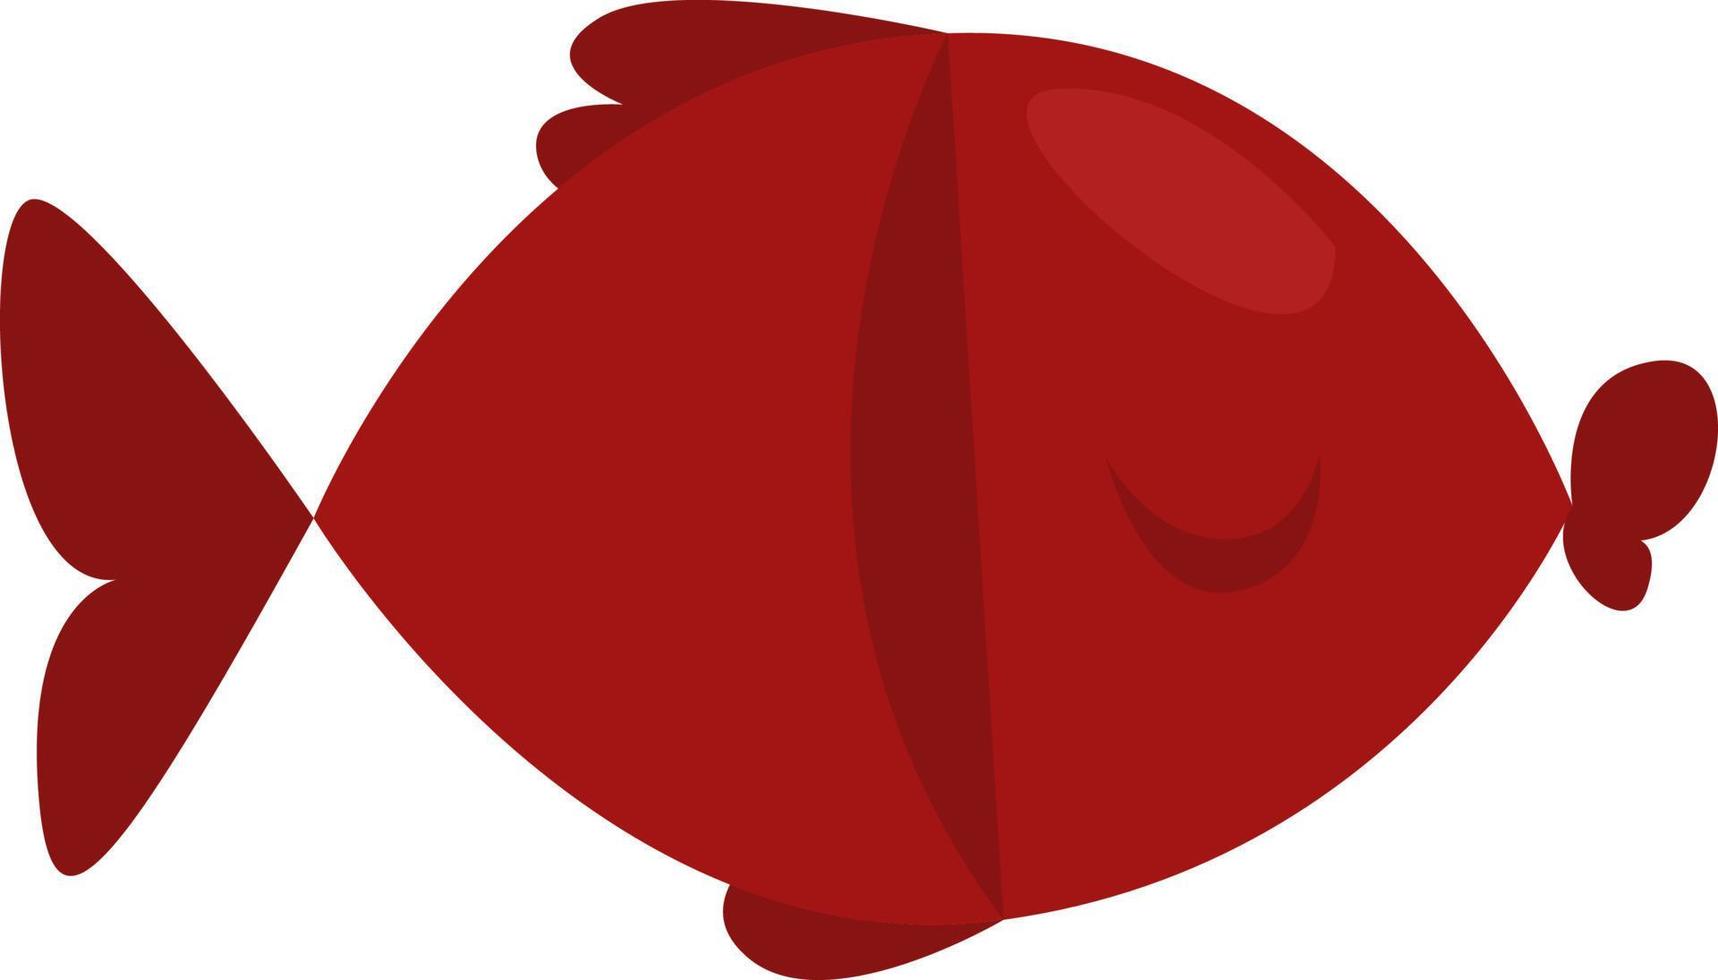 Red fish pet, illustration, vector, on a white background. vector